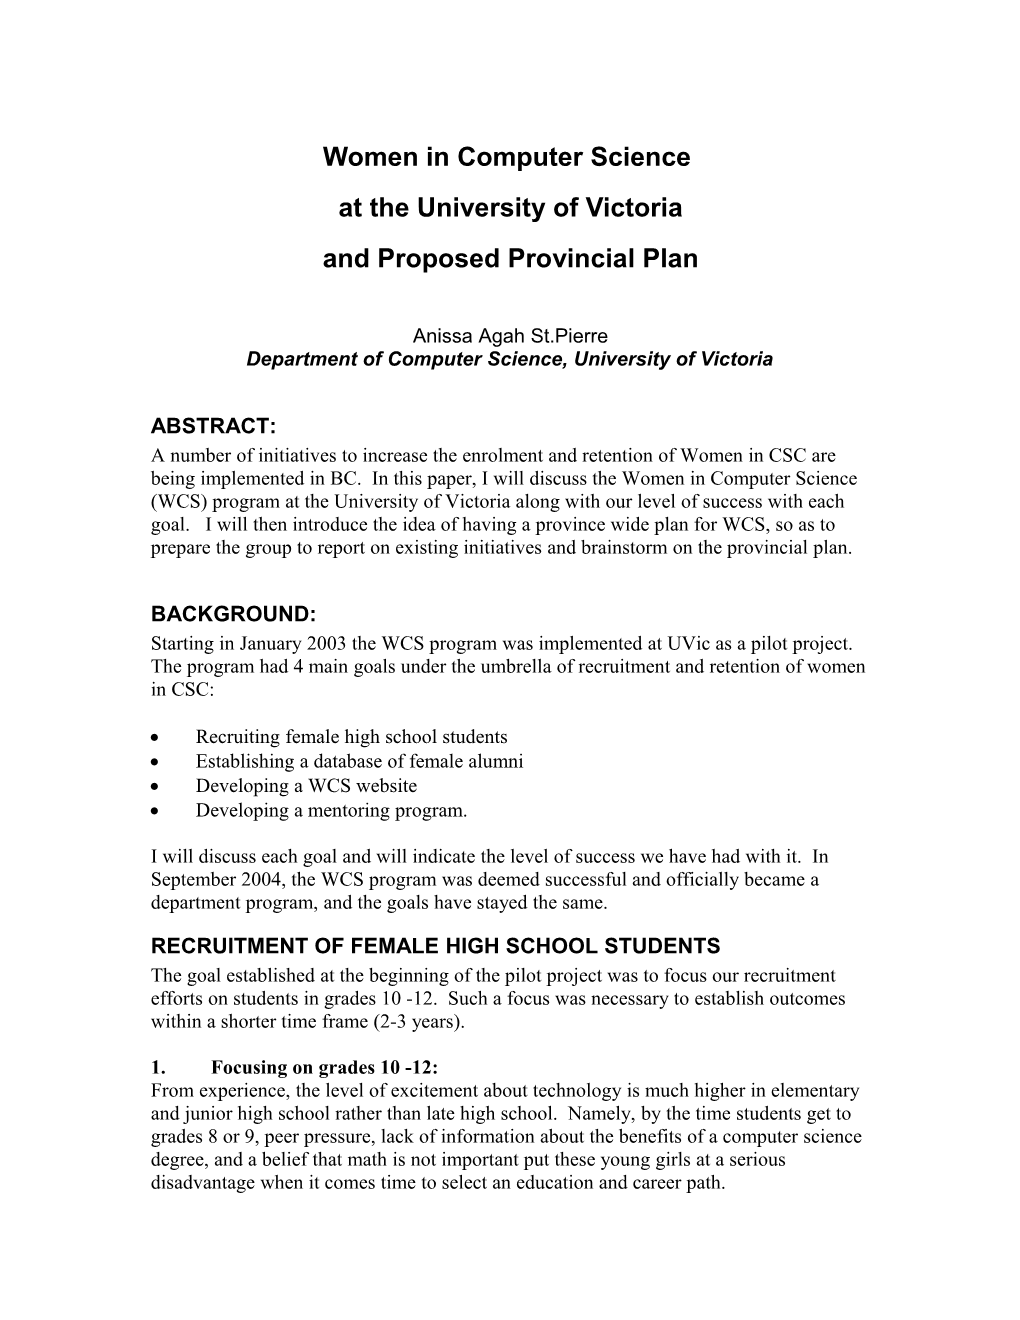 WCS at the University of Victoria and Proposed Provincial Plan